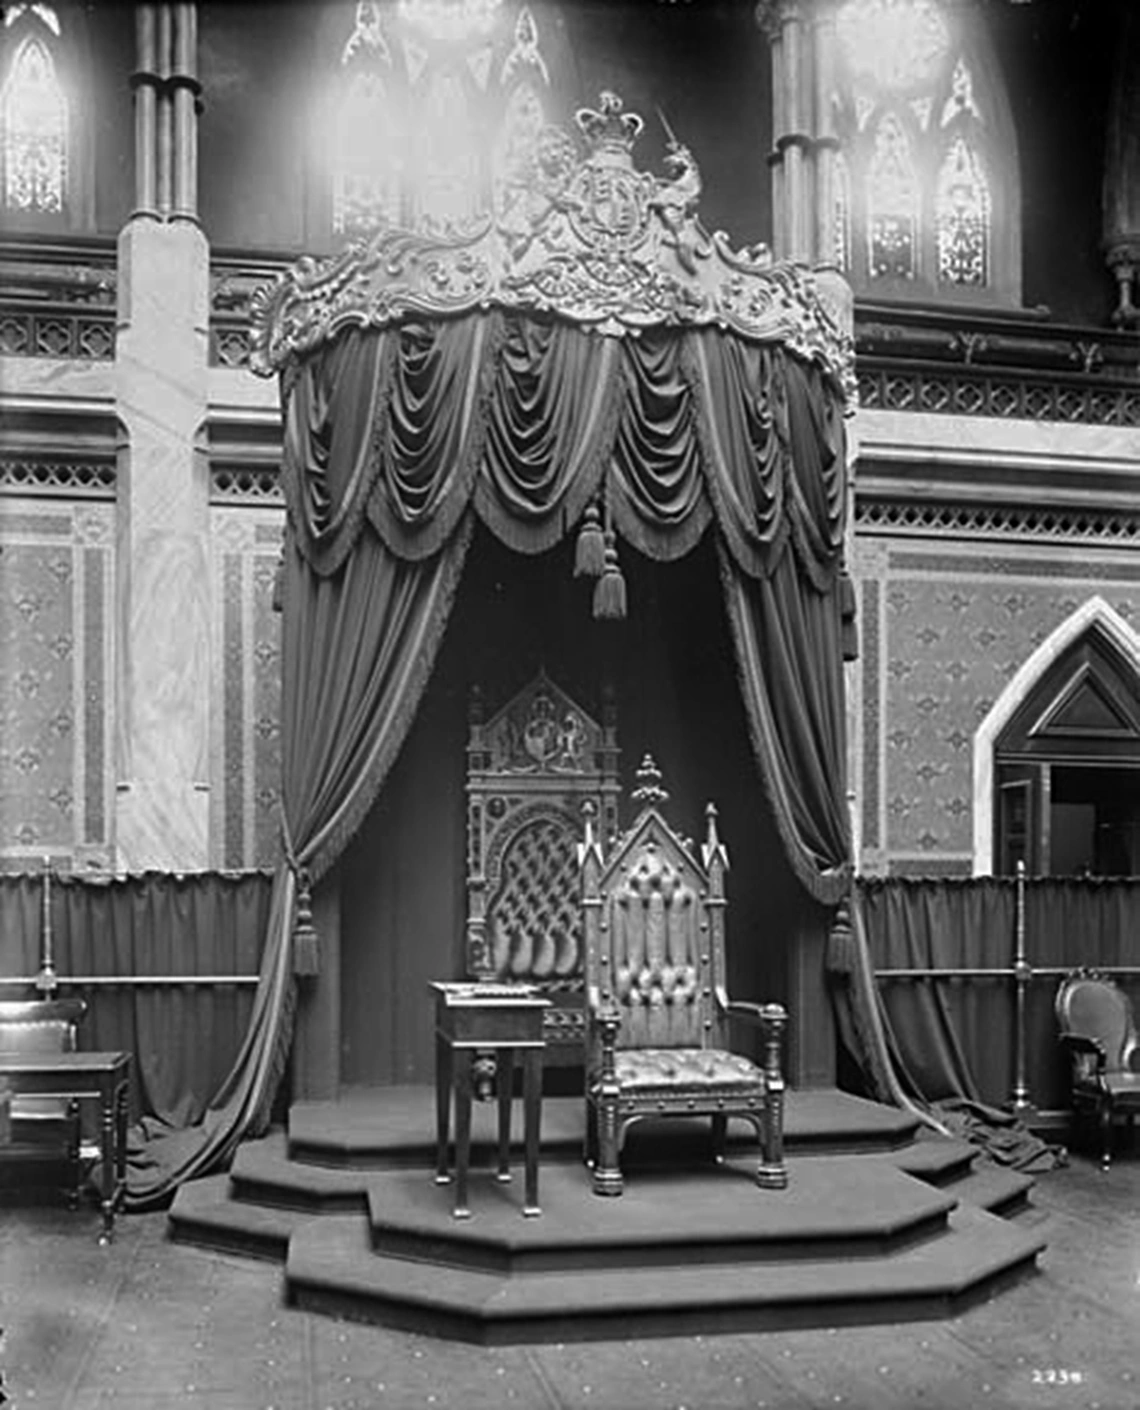 The sovereign’s throne sits in the original 1867 Senate Chamber behind the Speaker’s chair. (Library and Archives Canada)